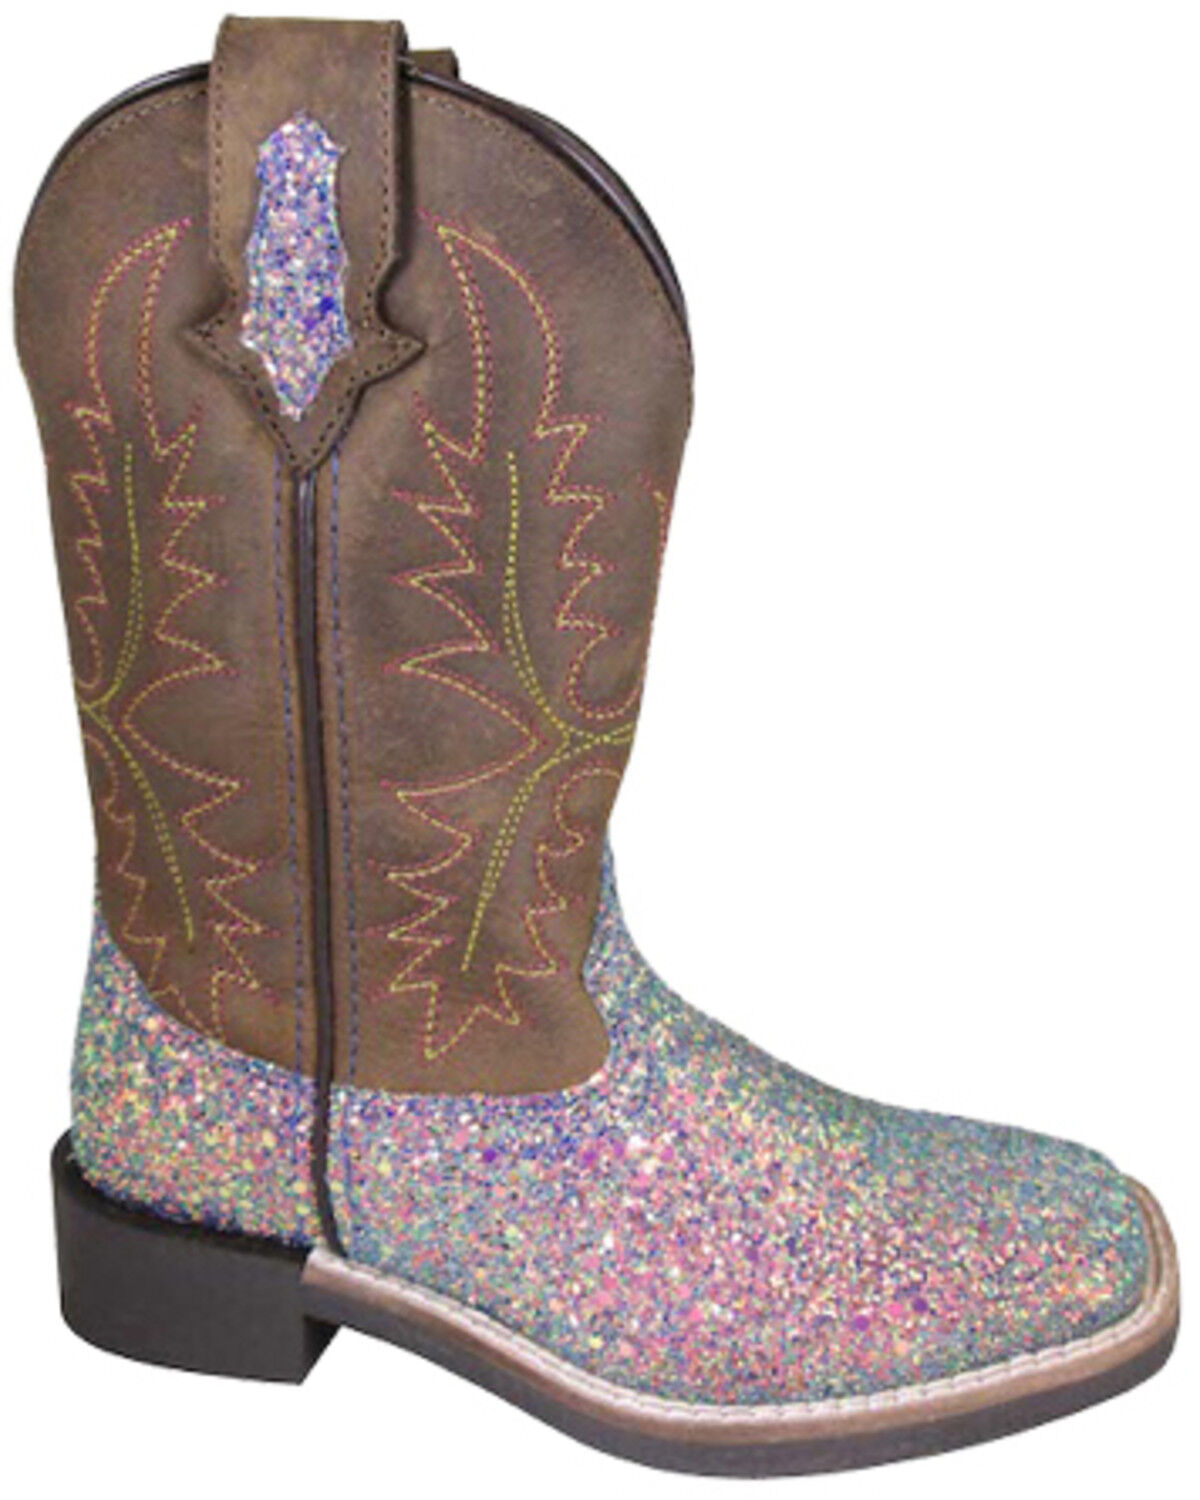 Youth Western Boot Ariel Series Leather Shaft & Tricot Lining TPR Sole & Block Heel Smoky Mountain Boots Square Toe Leather Man-Made Trim Glitter Foot 